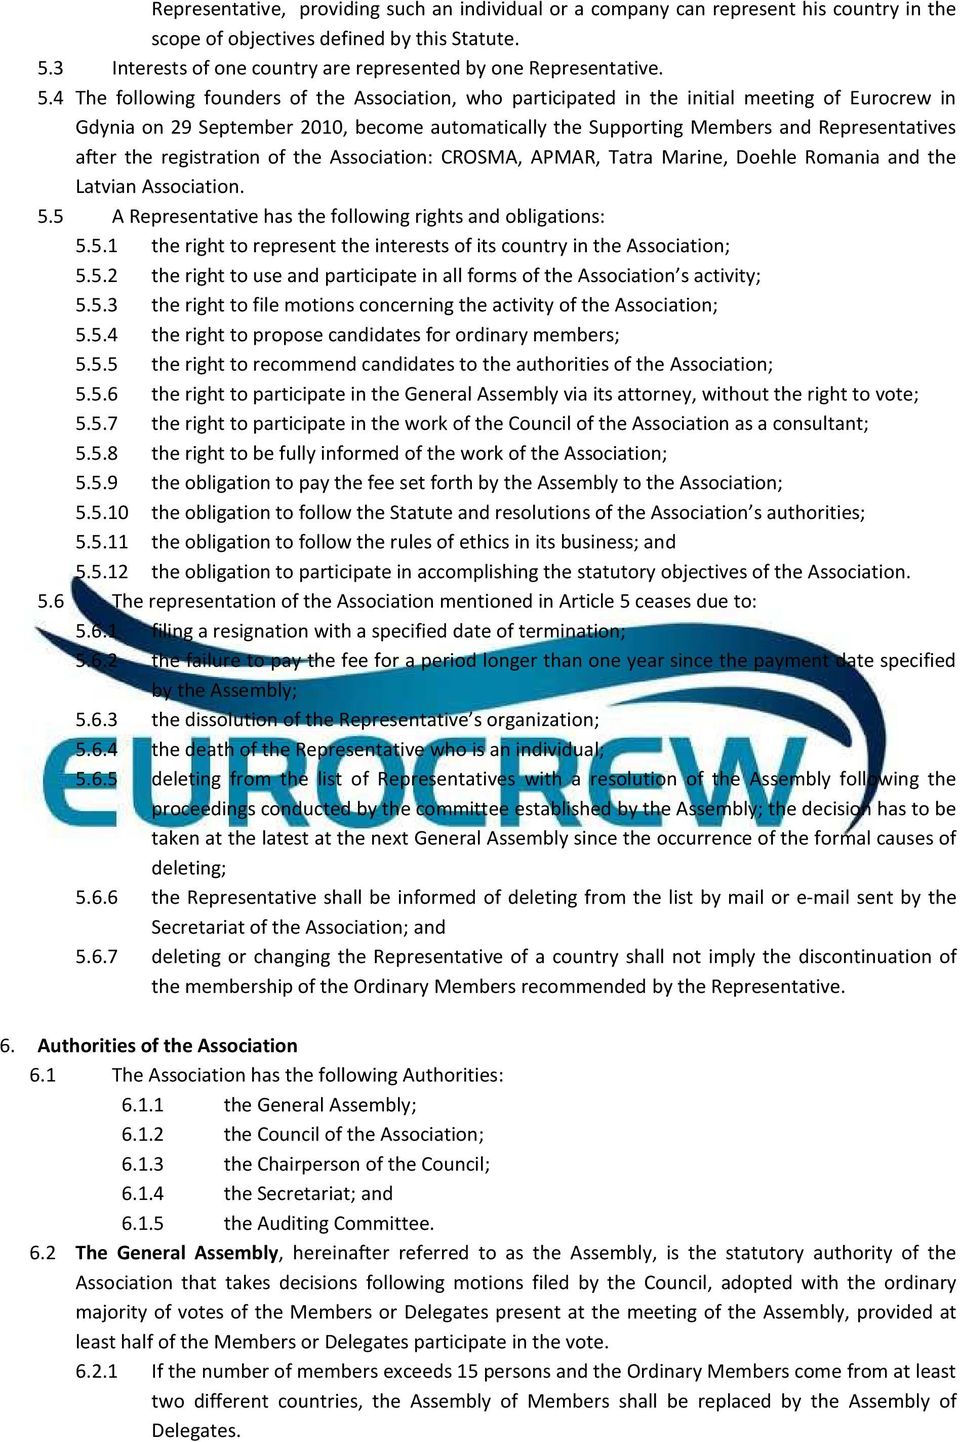 4 The following founders of the Association, who participated in the initial meeting of Eurocrew in Gdynia on 29 September 2010, become automatically the Supporting Members and Representatives after